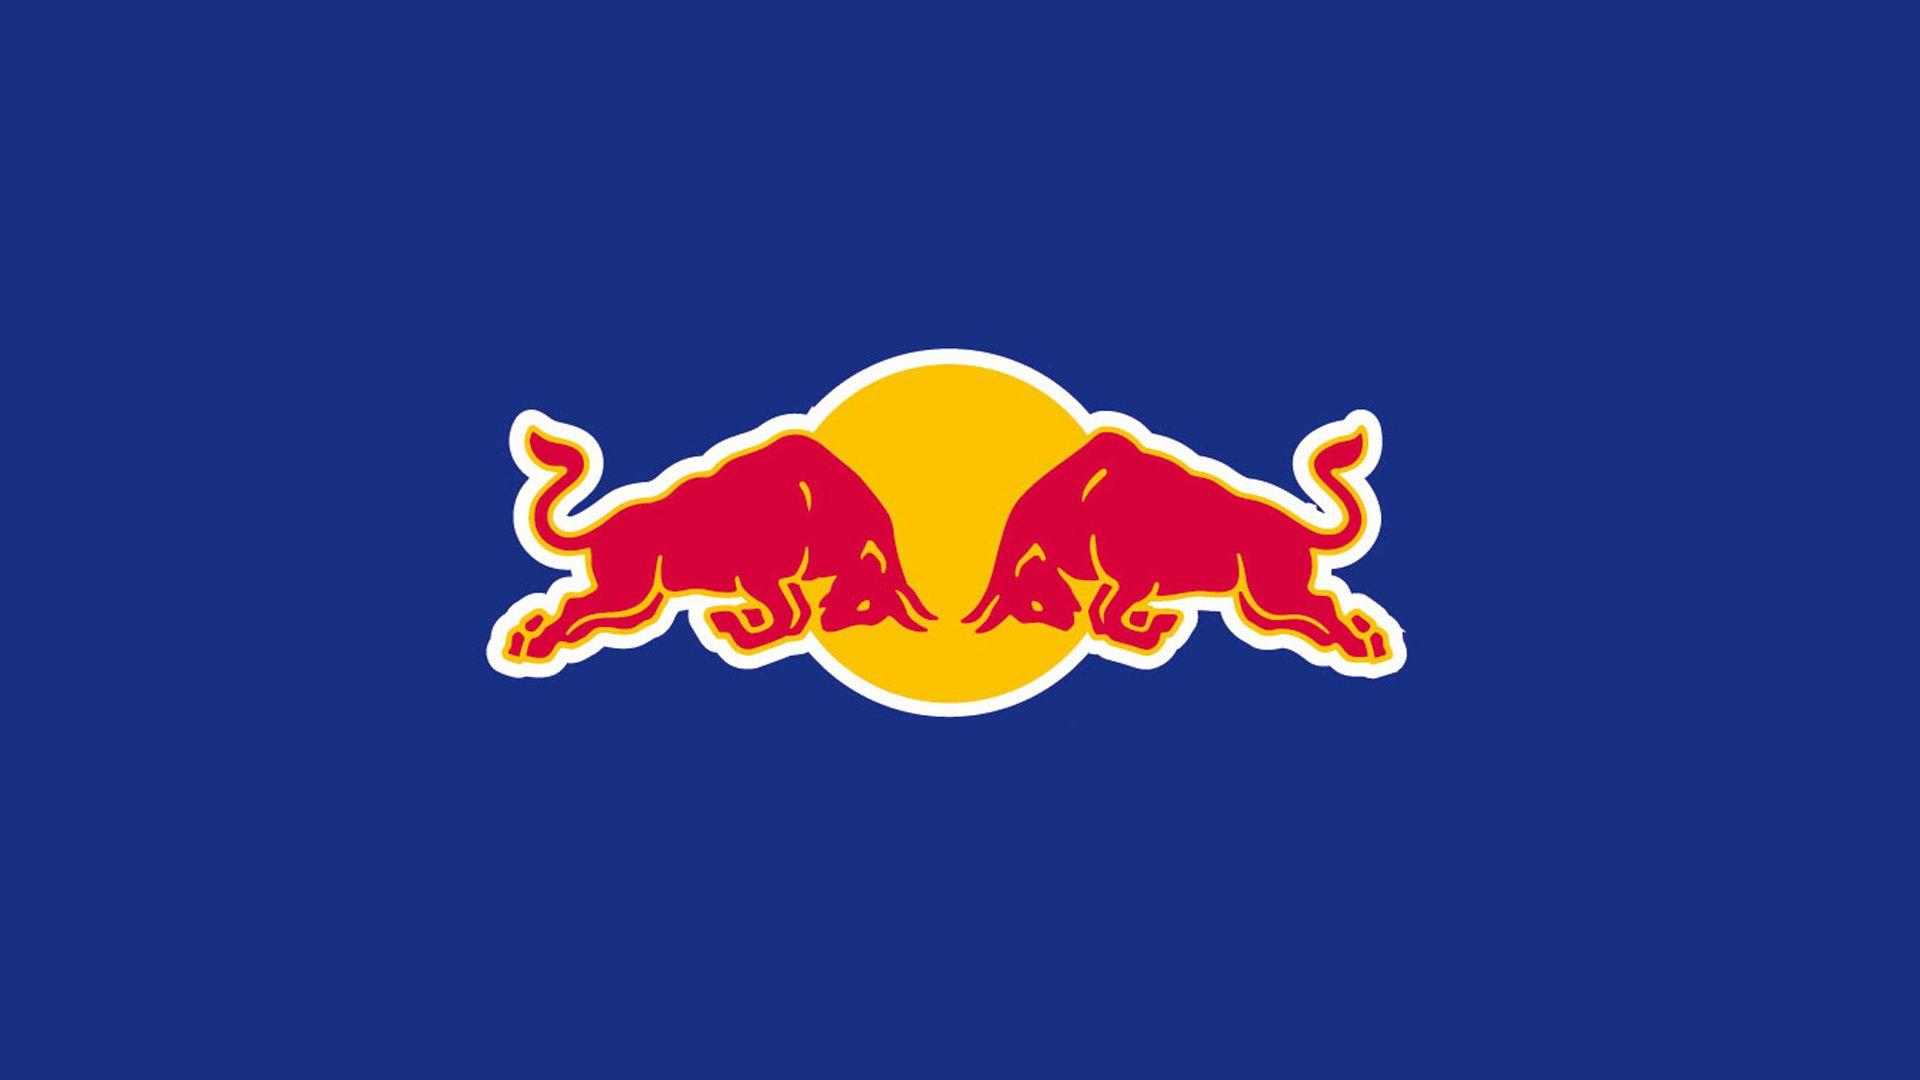 Red Bull HD Wallpaper Collection: Item 37857940